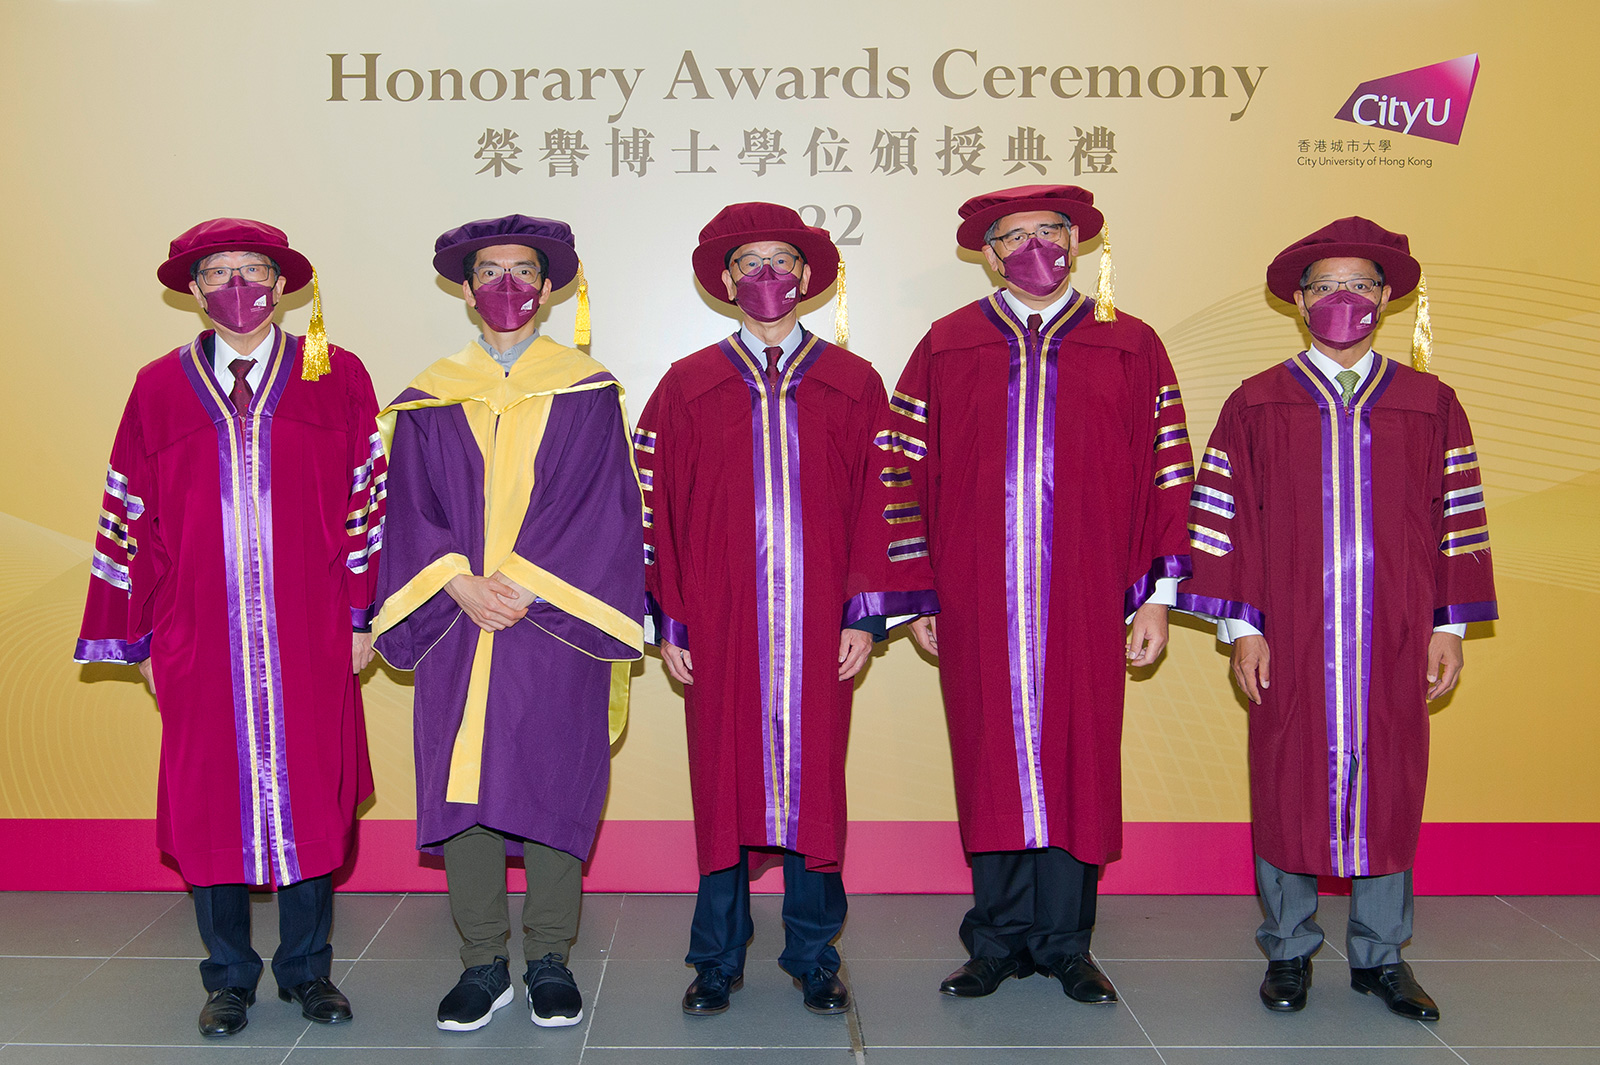 (From left) President Way Kuo, Dr John Maeda, Dr Chung Shui-ming, Mr Lester Garson Huang and Mr Charles Chin Ying-on.